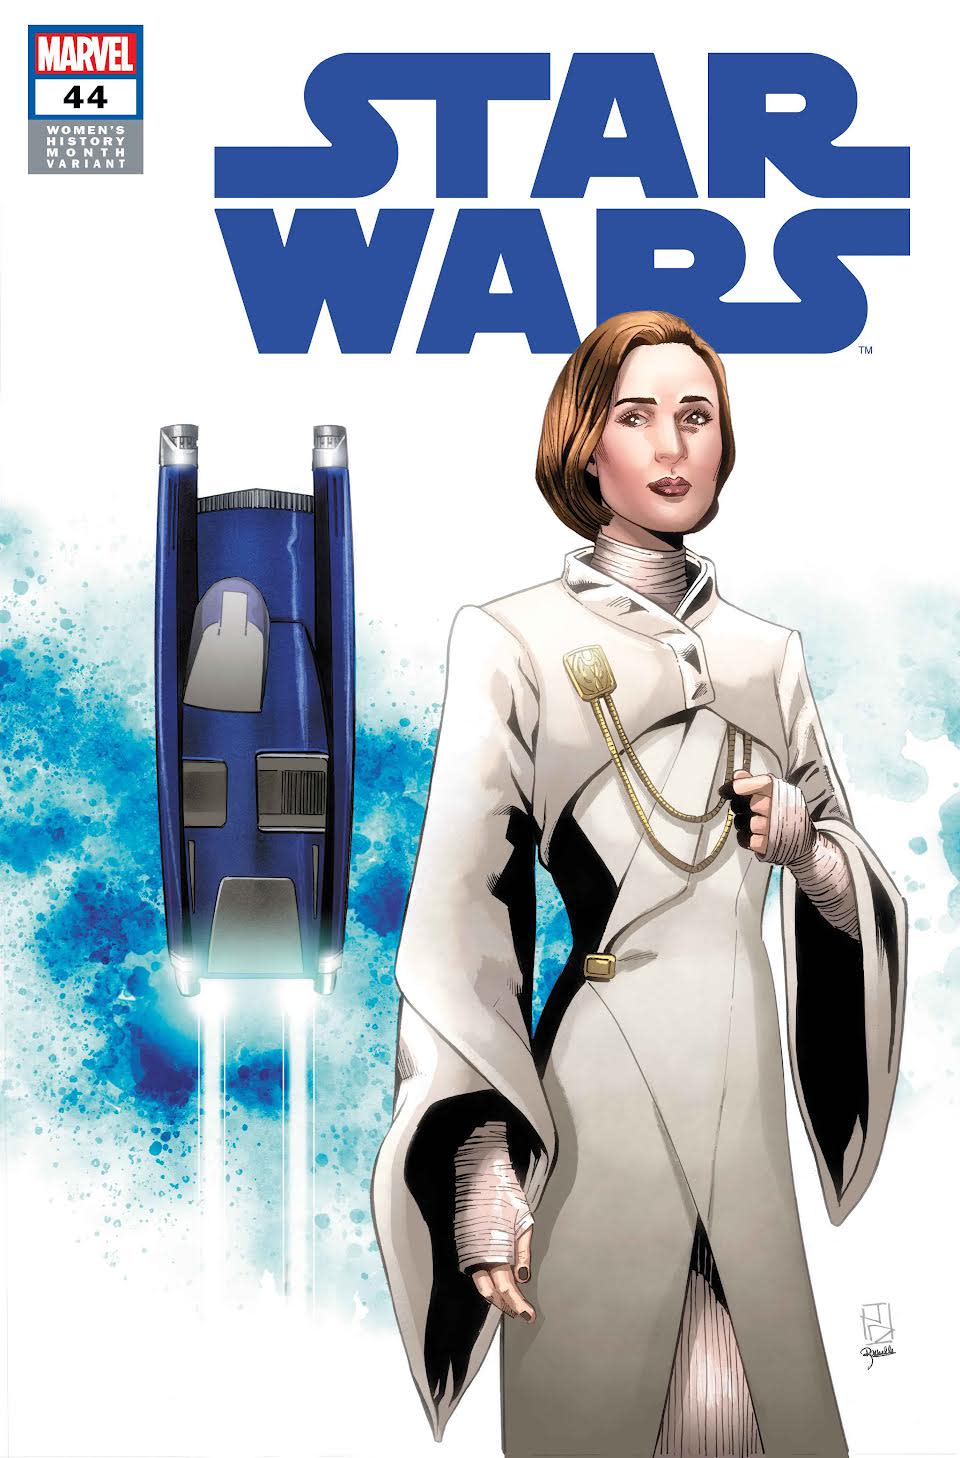 Star Wars Women's History Month Covers